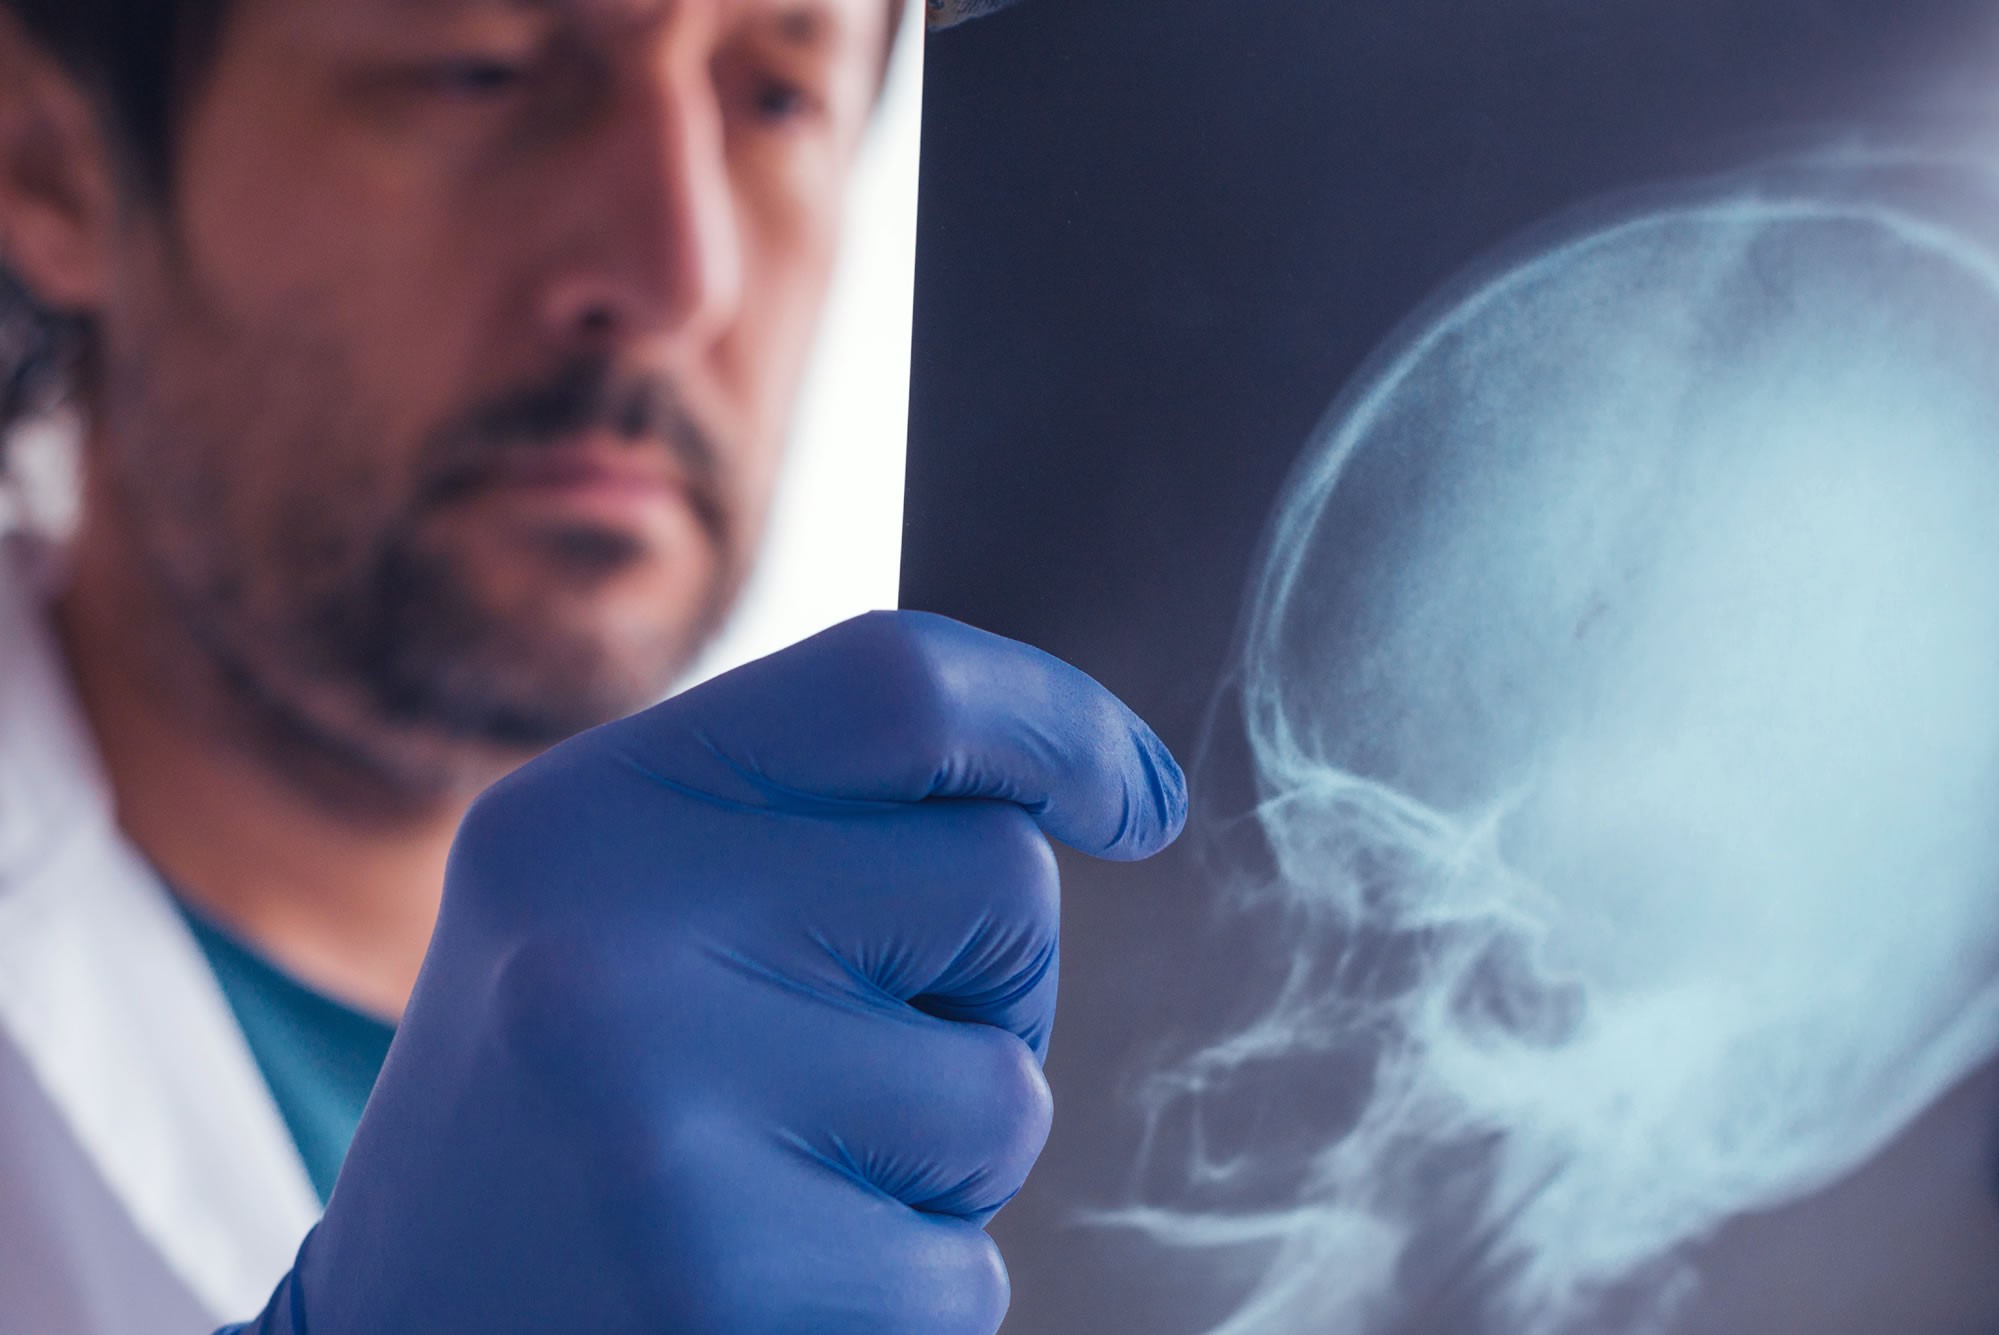 examining x-ray of skull - brain/head injury claim compensation solicitors Stockport